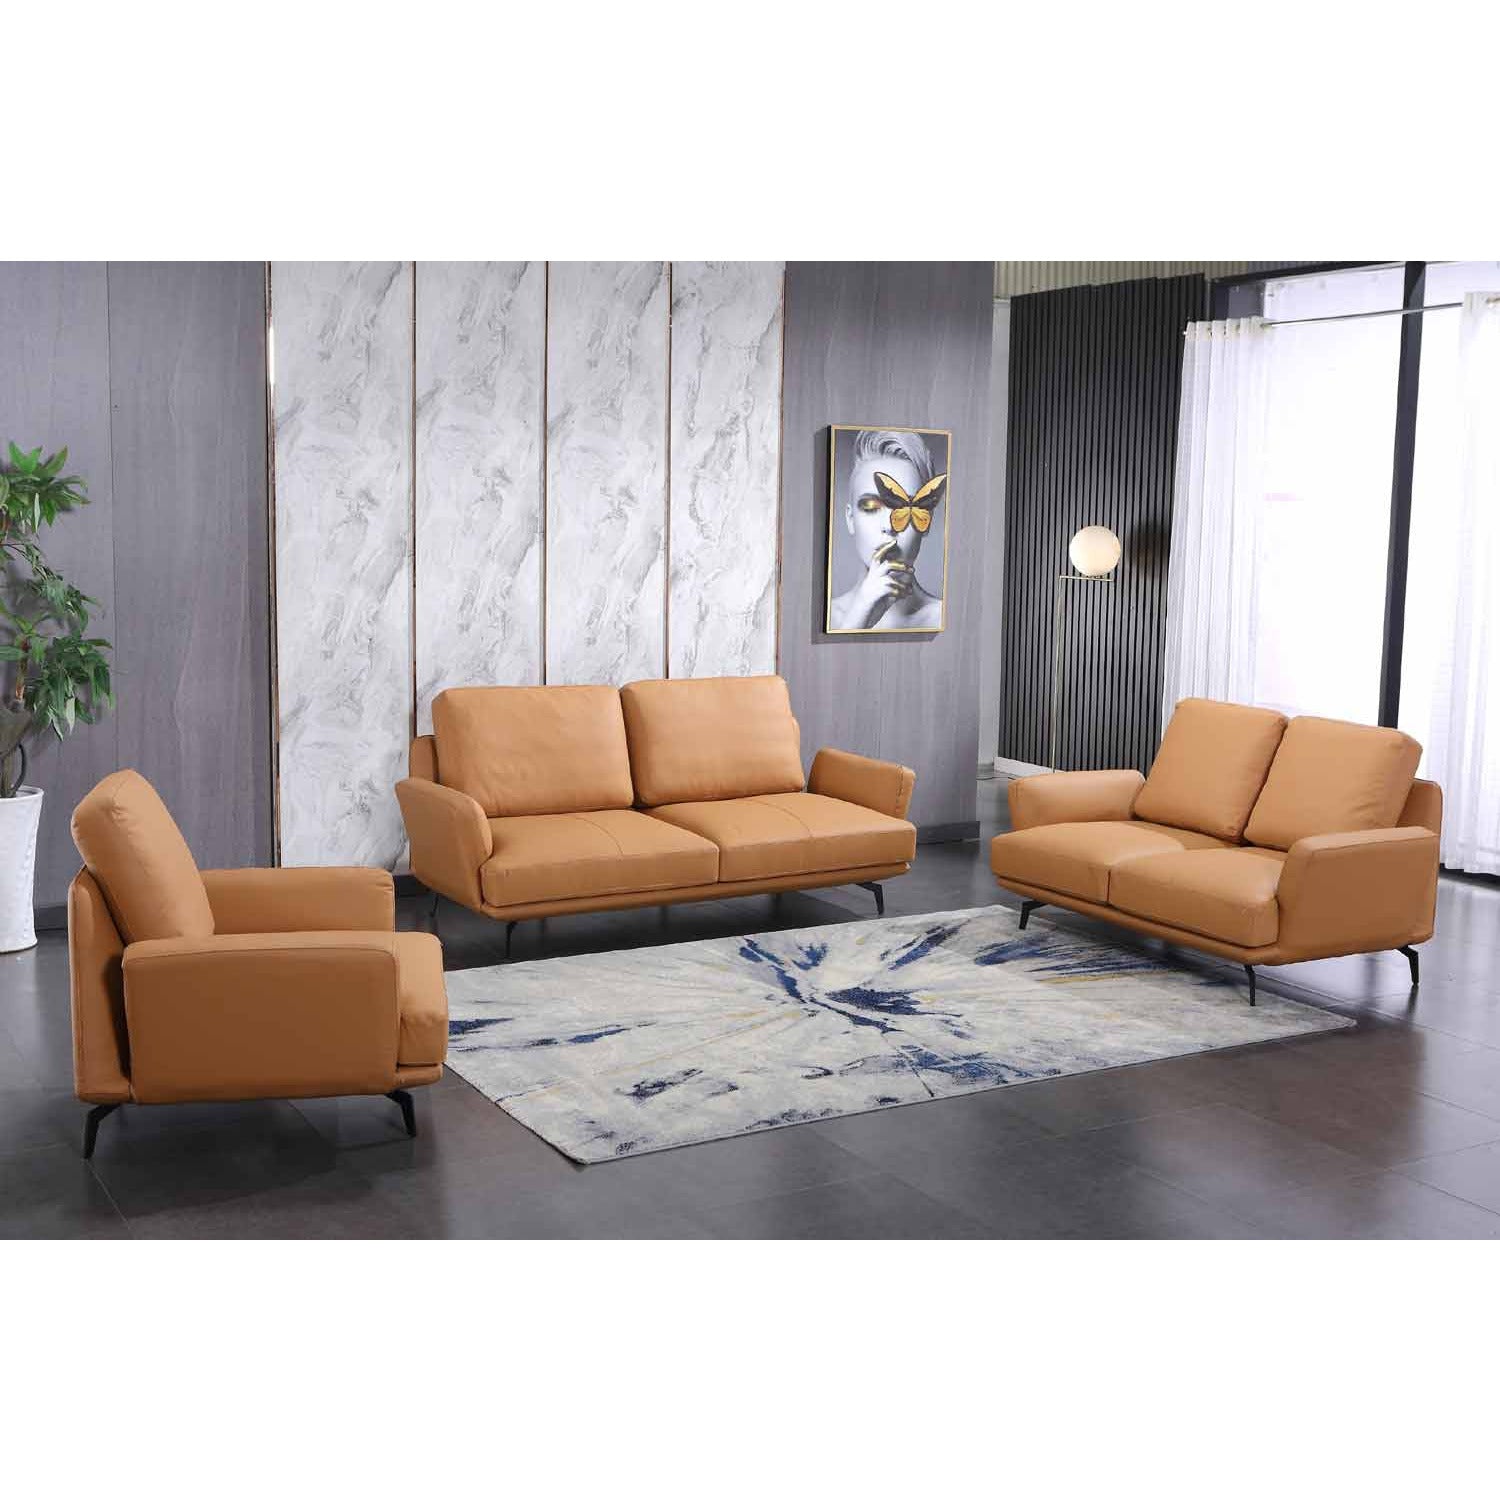 European Furniture - Tratto 2 Piece Living Room Set in Cognac - 37457-2SET - New Star Living